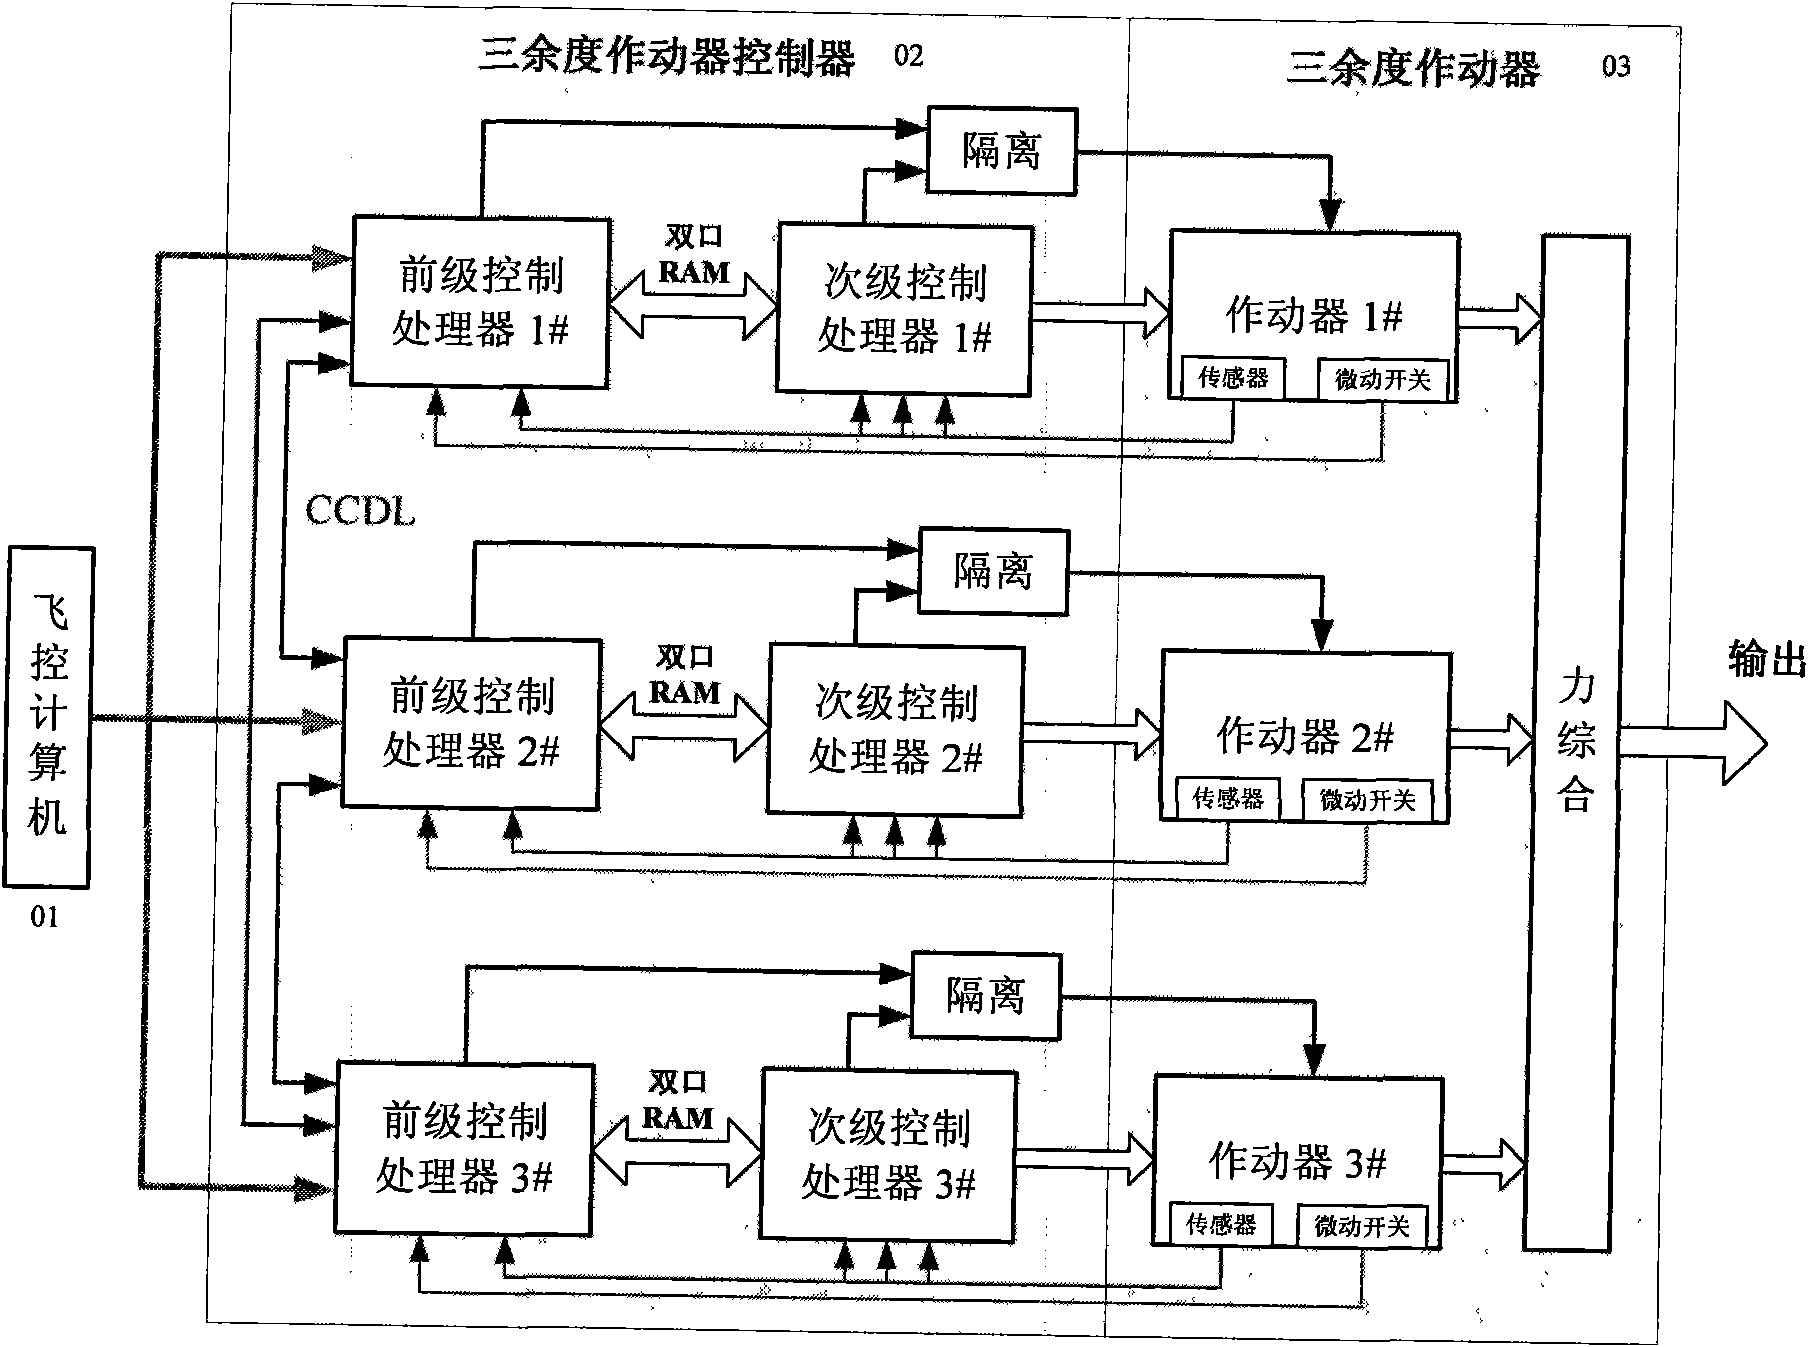 High-performance tri-redundancy steering engine based on single-channel dual-processor structure